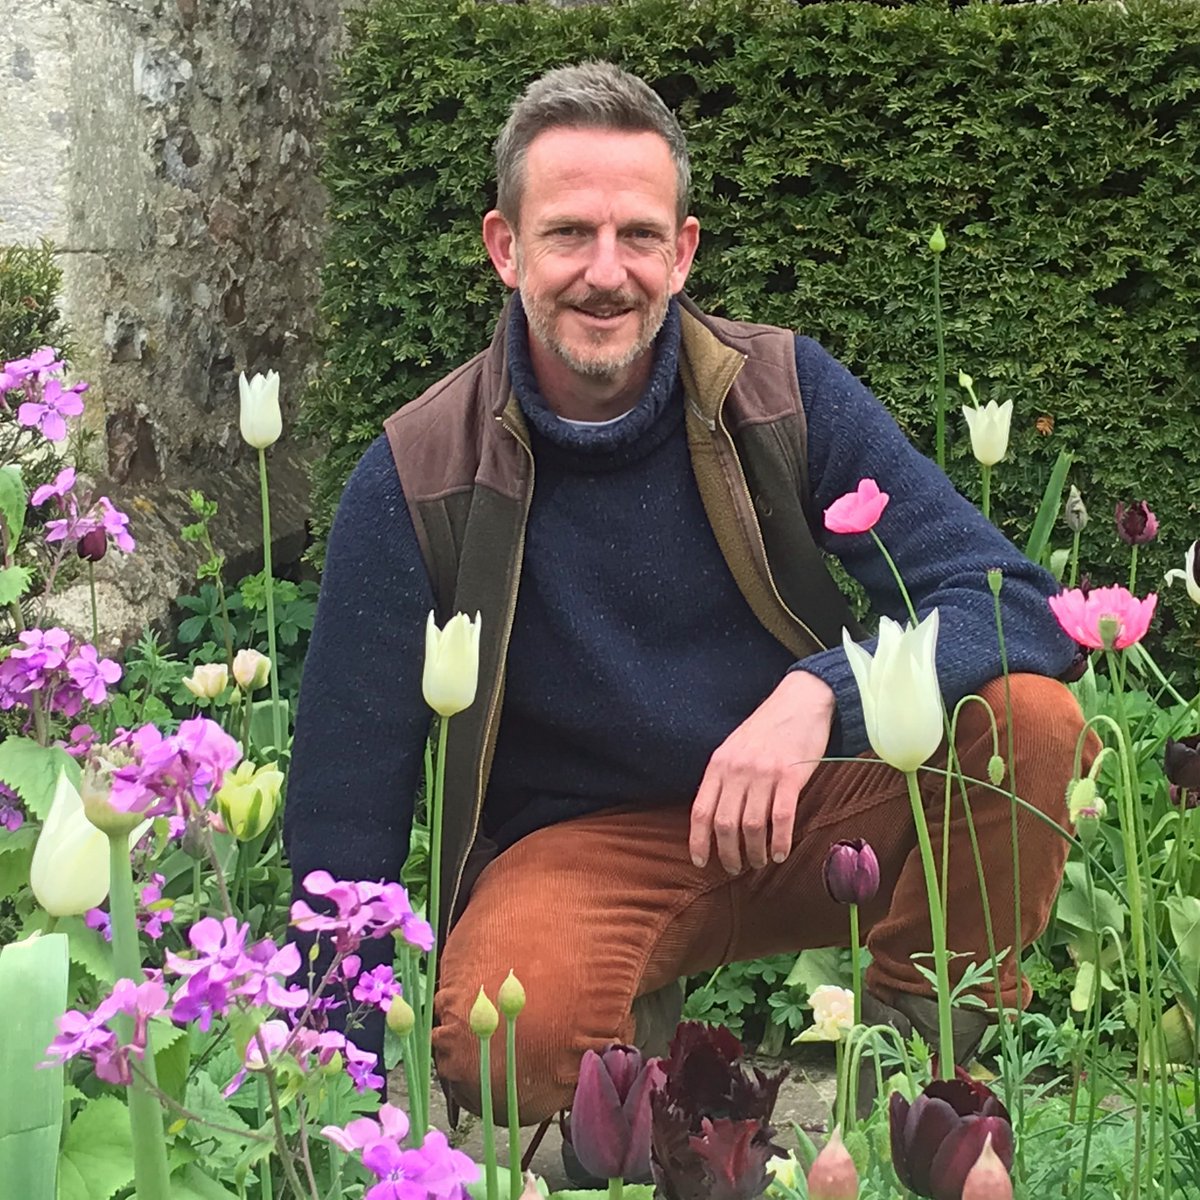 Tonight, Nick's in Devon exploring the garden at South Wood Farm where a modern planting scheme makes the most of a traditional setting. See you at 9pm on BBC Two 🙂 🌷 #GardenersWorld #Gardening #GardenDesign #Spring